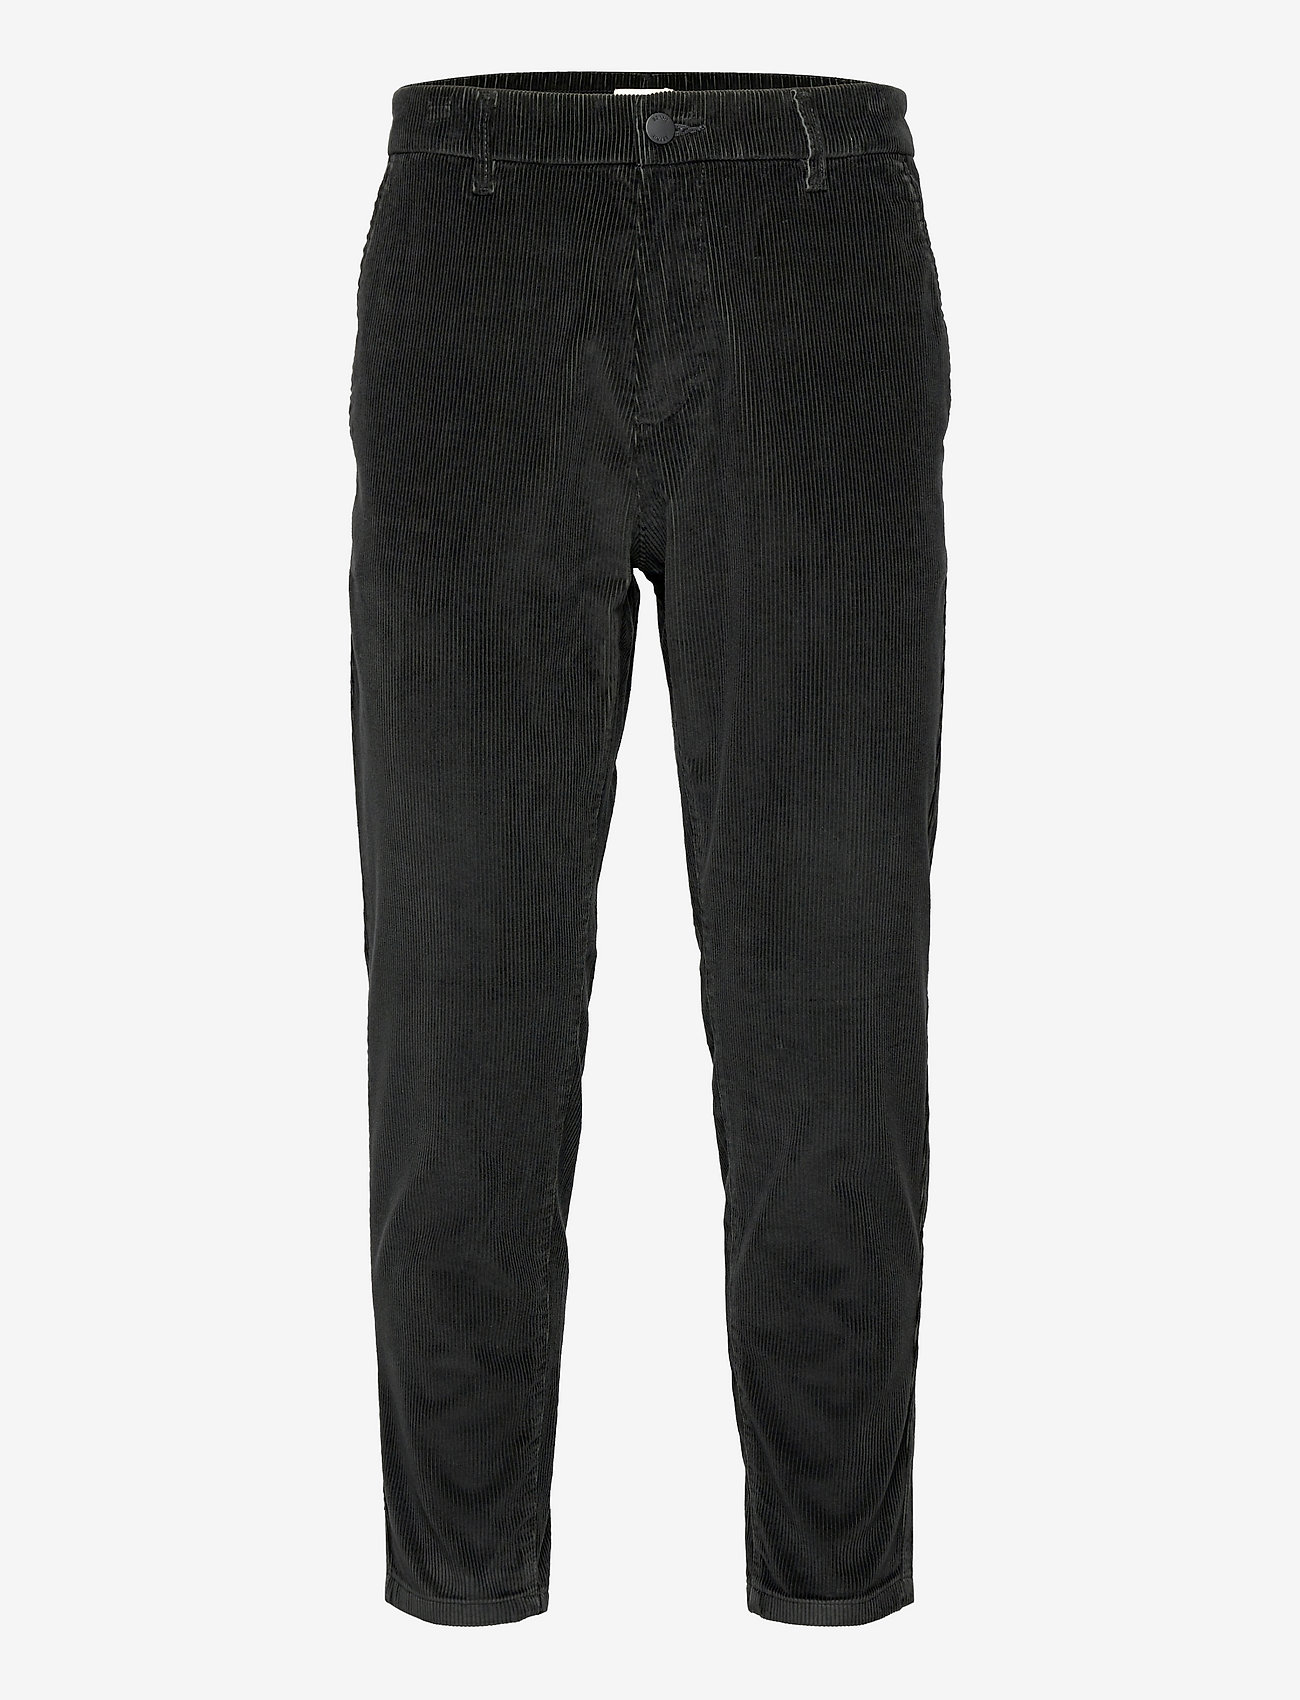 Esprit Casual - Pants woven - casual - anthracite - 0